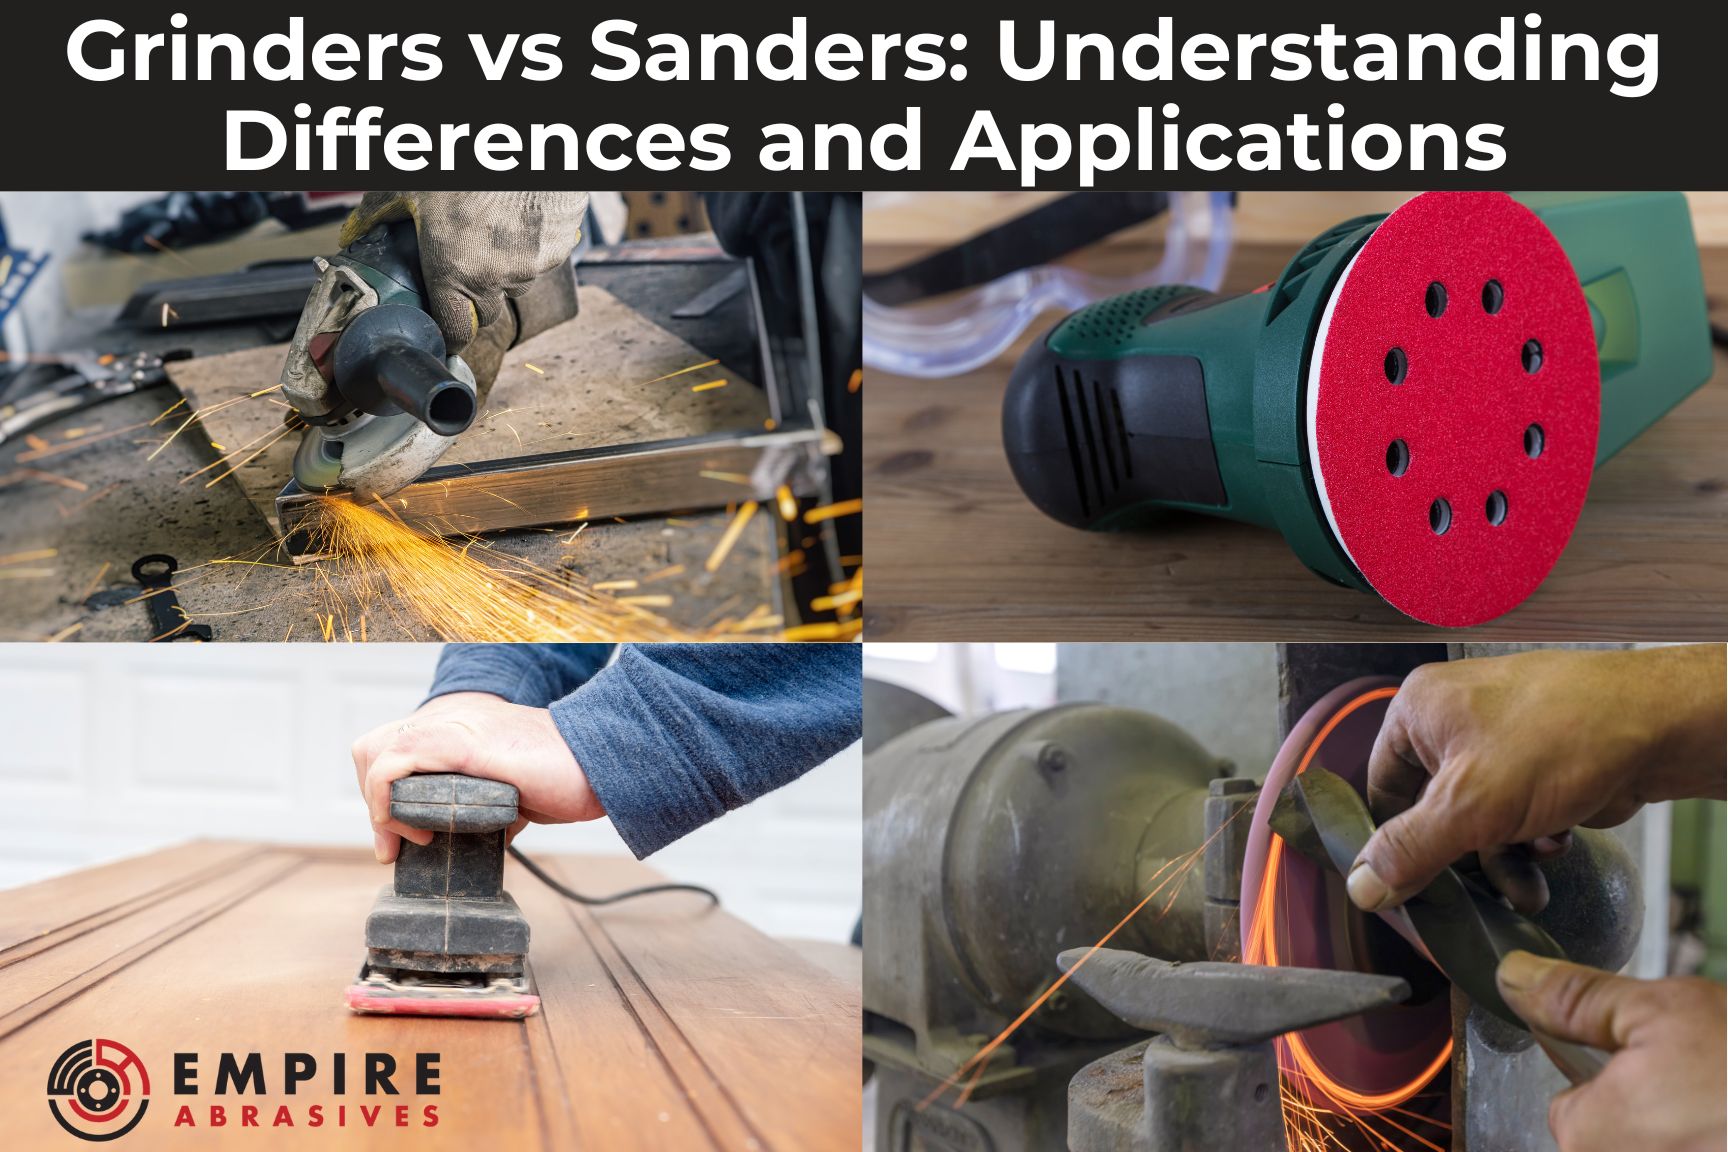 Collage of power tools showcasing grinder vs sander differences with images of an angle grinder producing sparks while cutting metal, a handheld orbital sander smoothing a wooden surface, and a bench grinder sharpening a tool